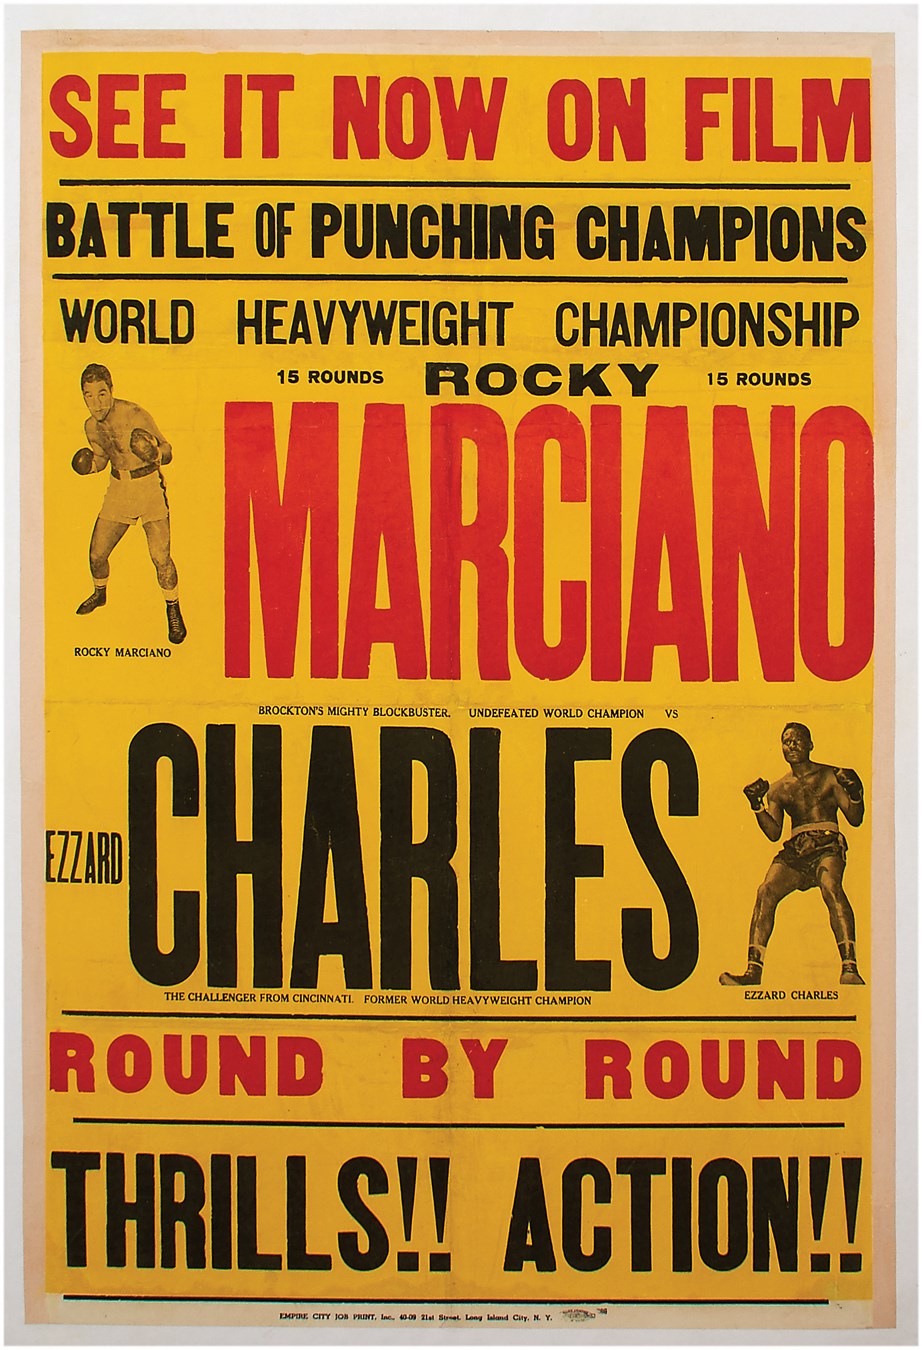 Marciano vs. Charles Fight Film Poster